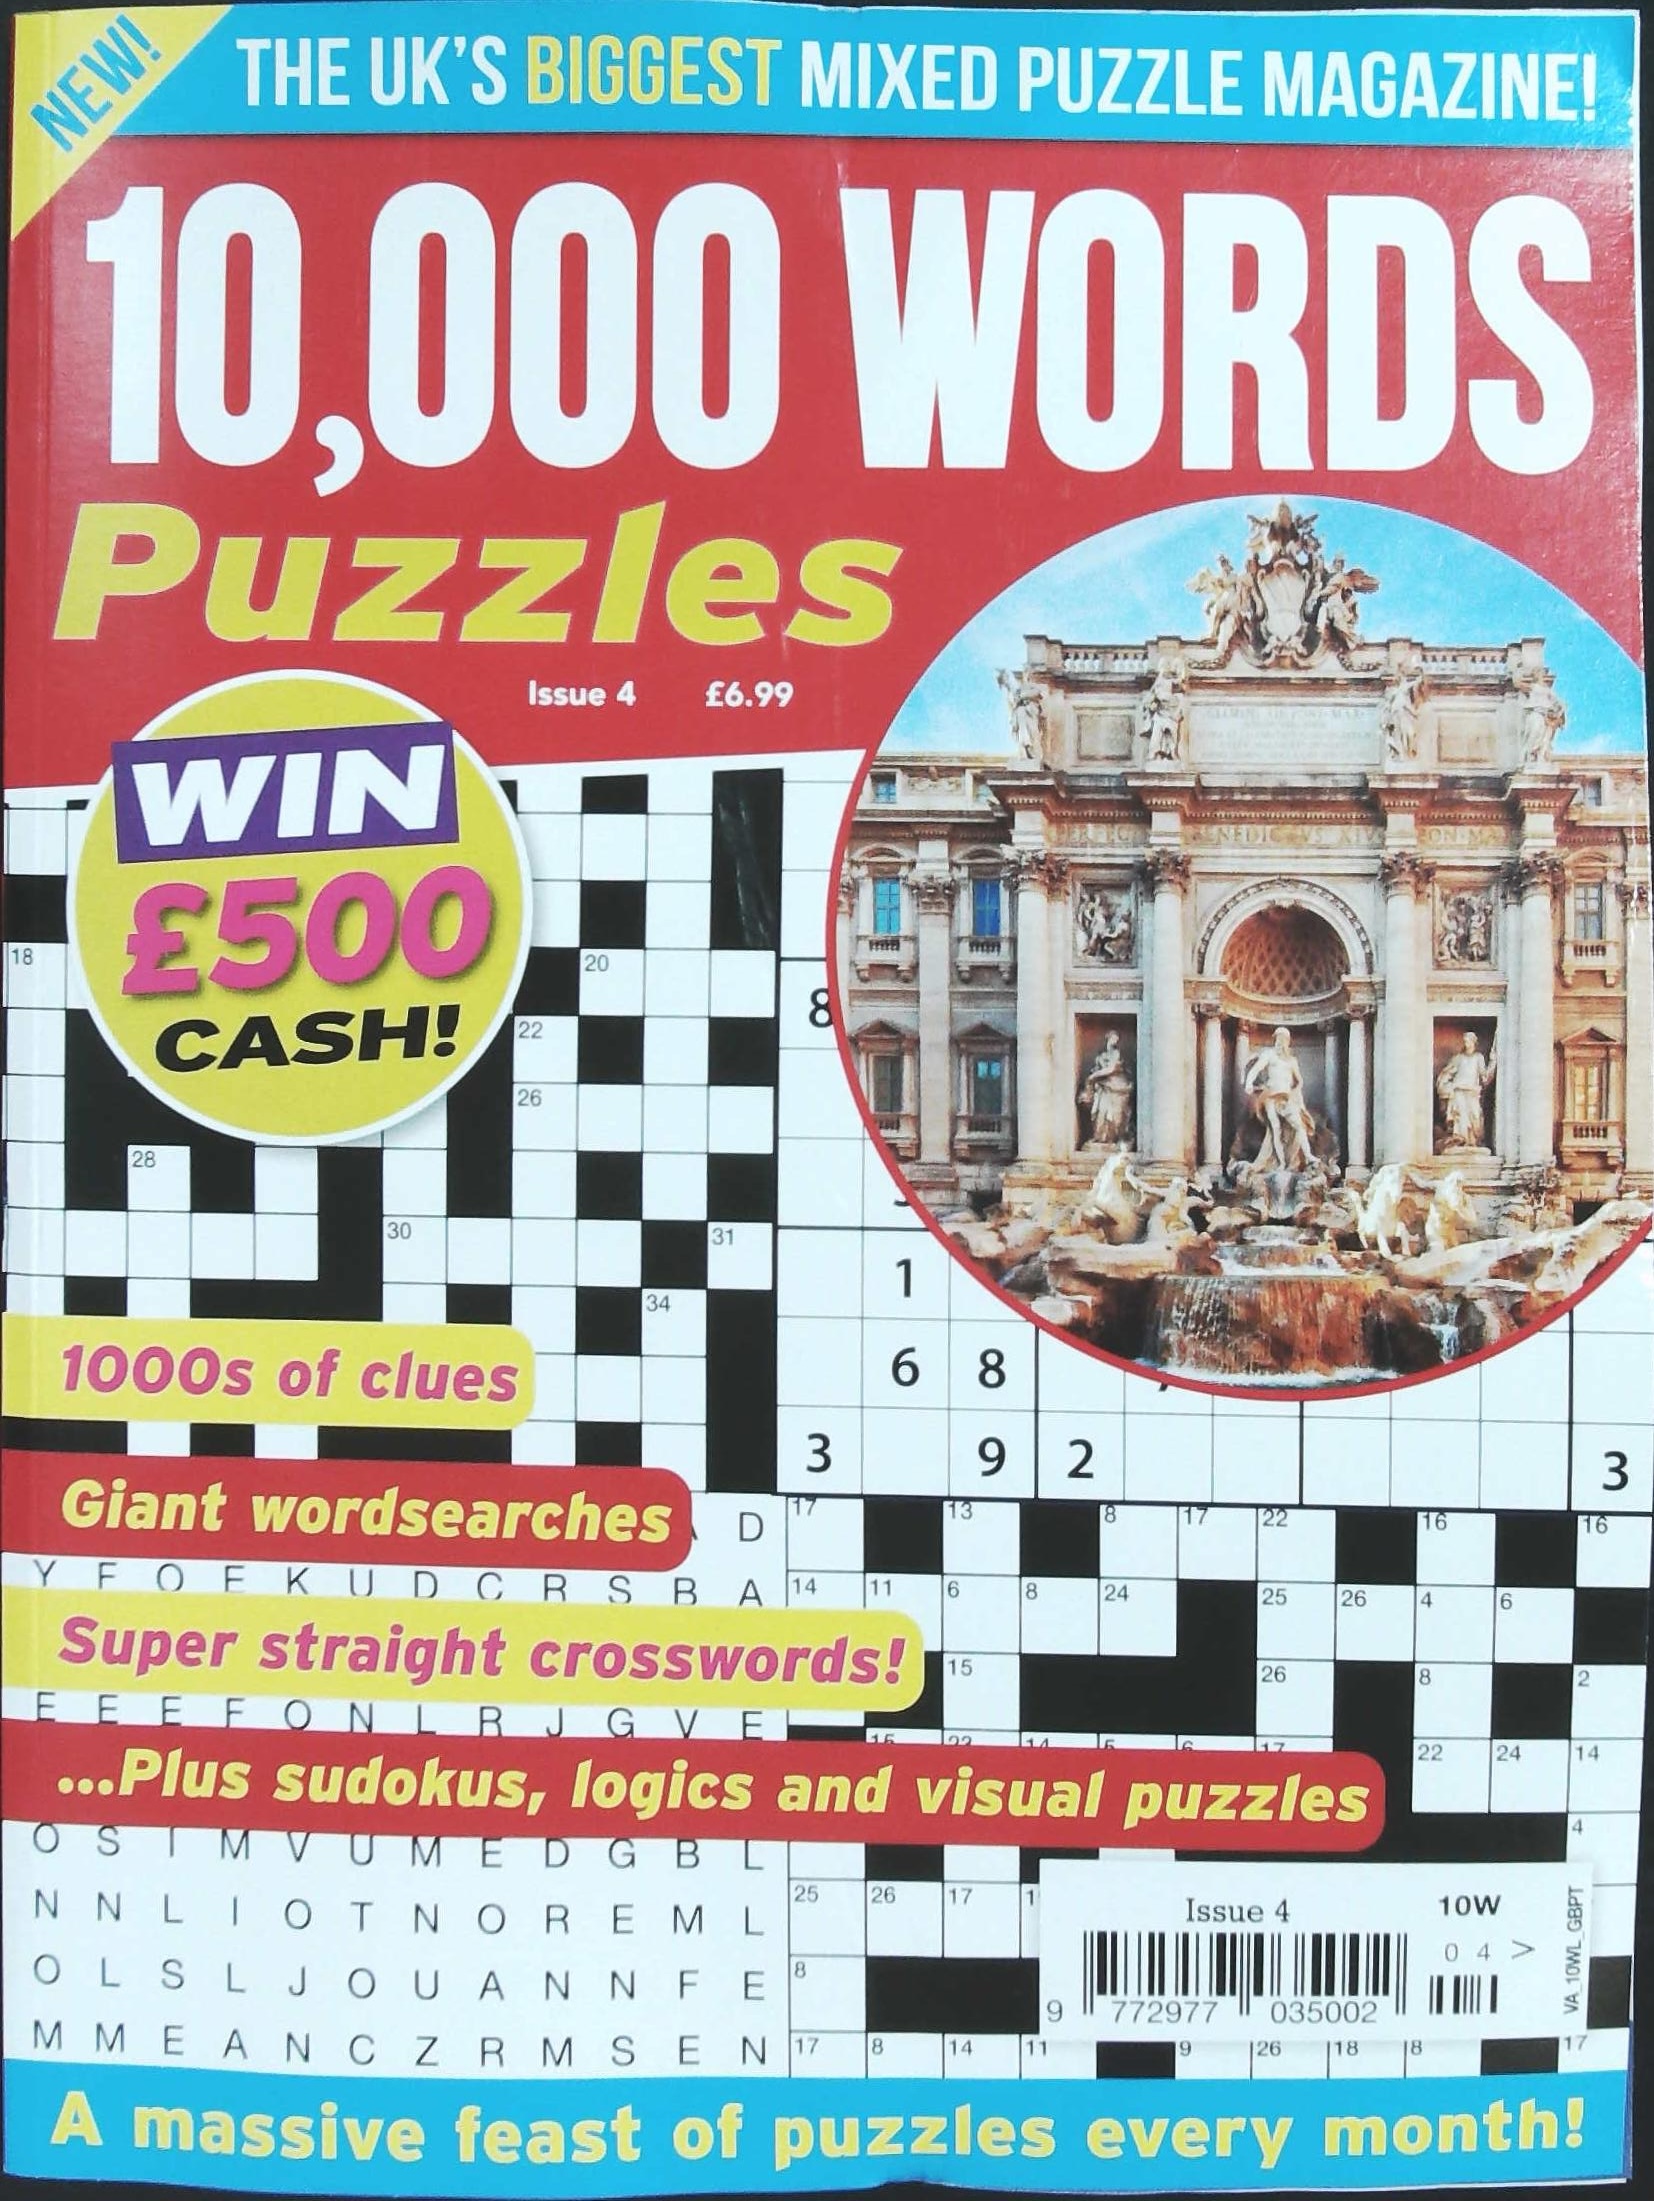 10000 WORD PUZZLES